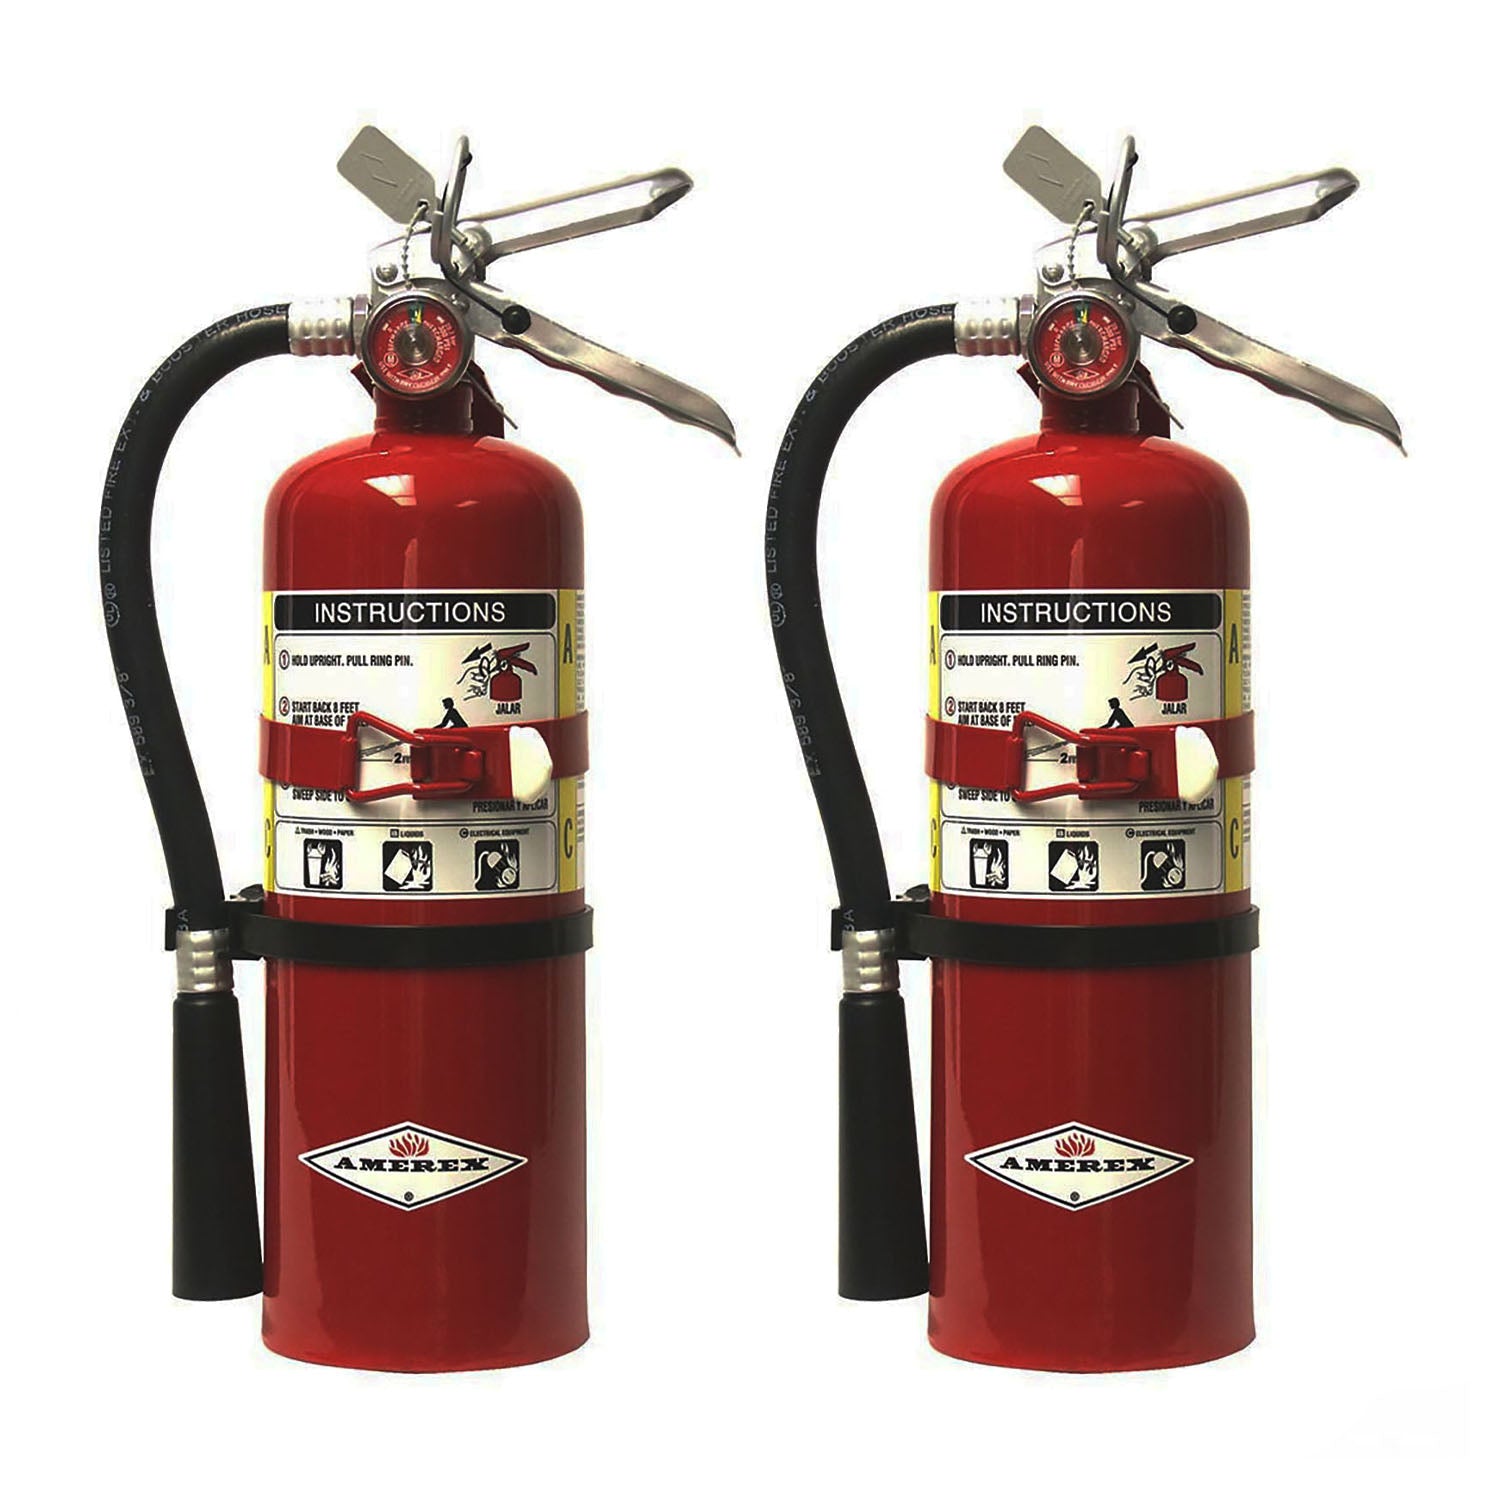 Amerex B500T ABC Dry Chemical Fire Extinguisher with Aluminum Valve and Bracket - 2 Pack - Pro-Distributing